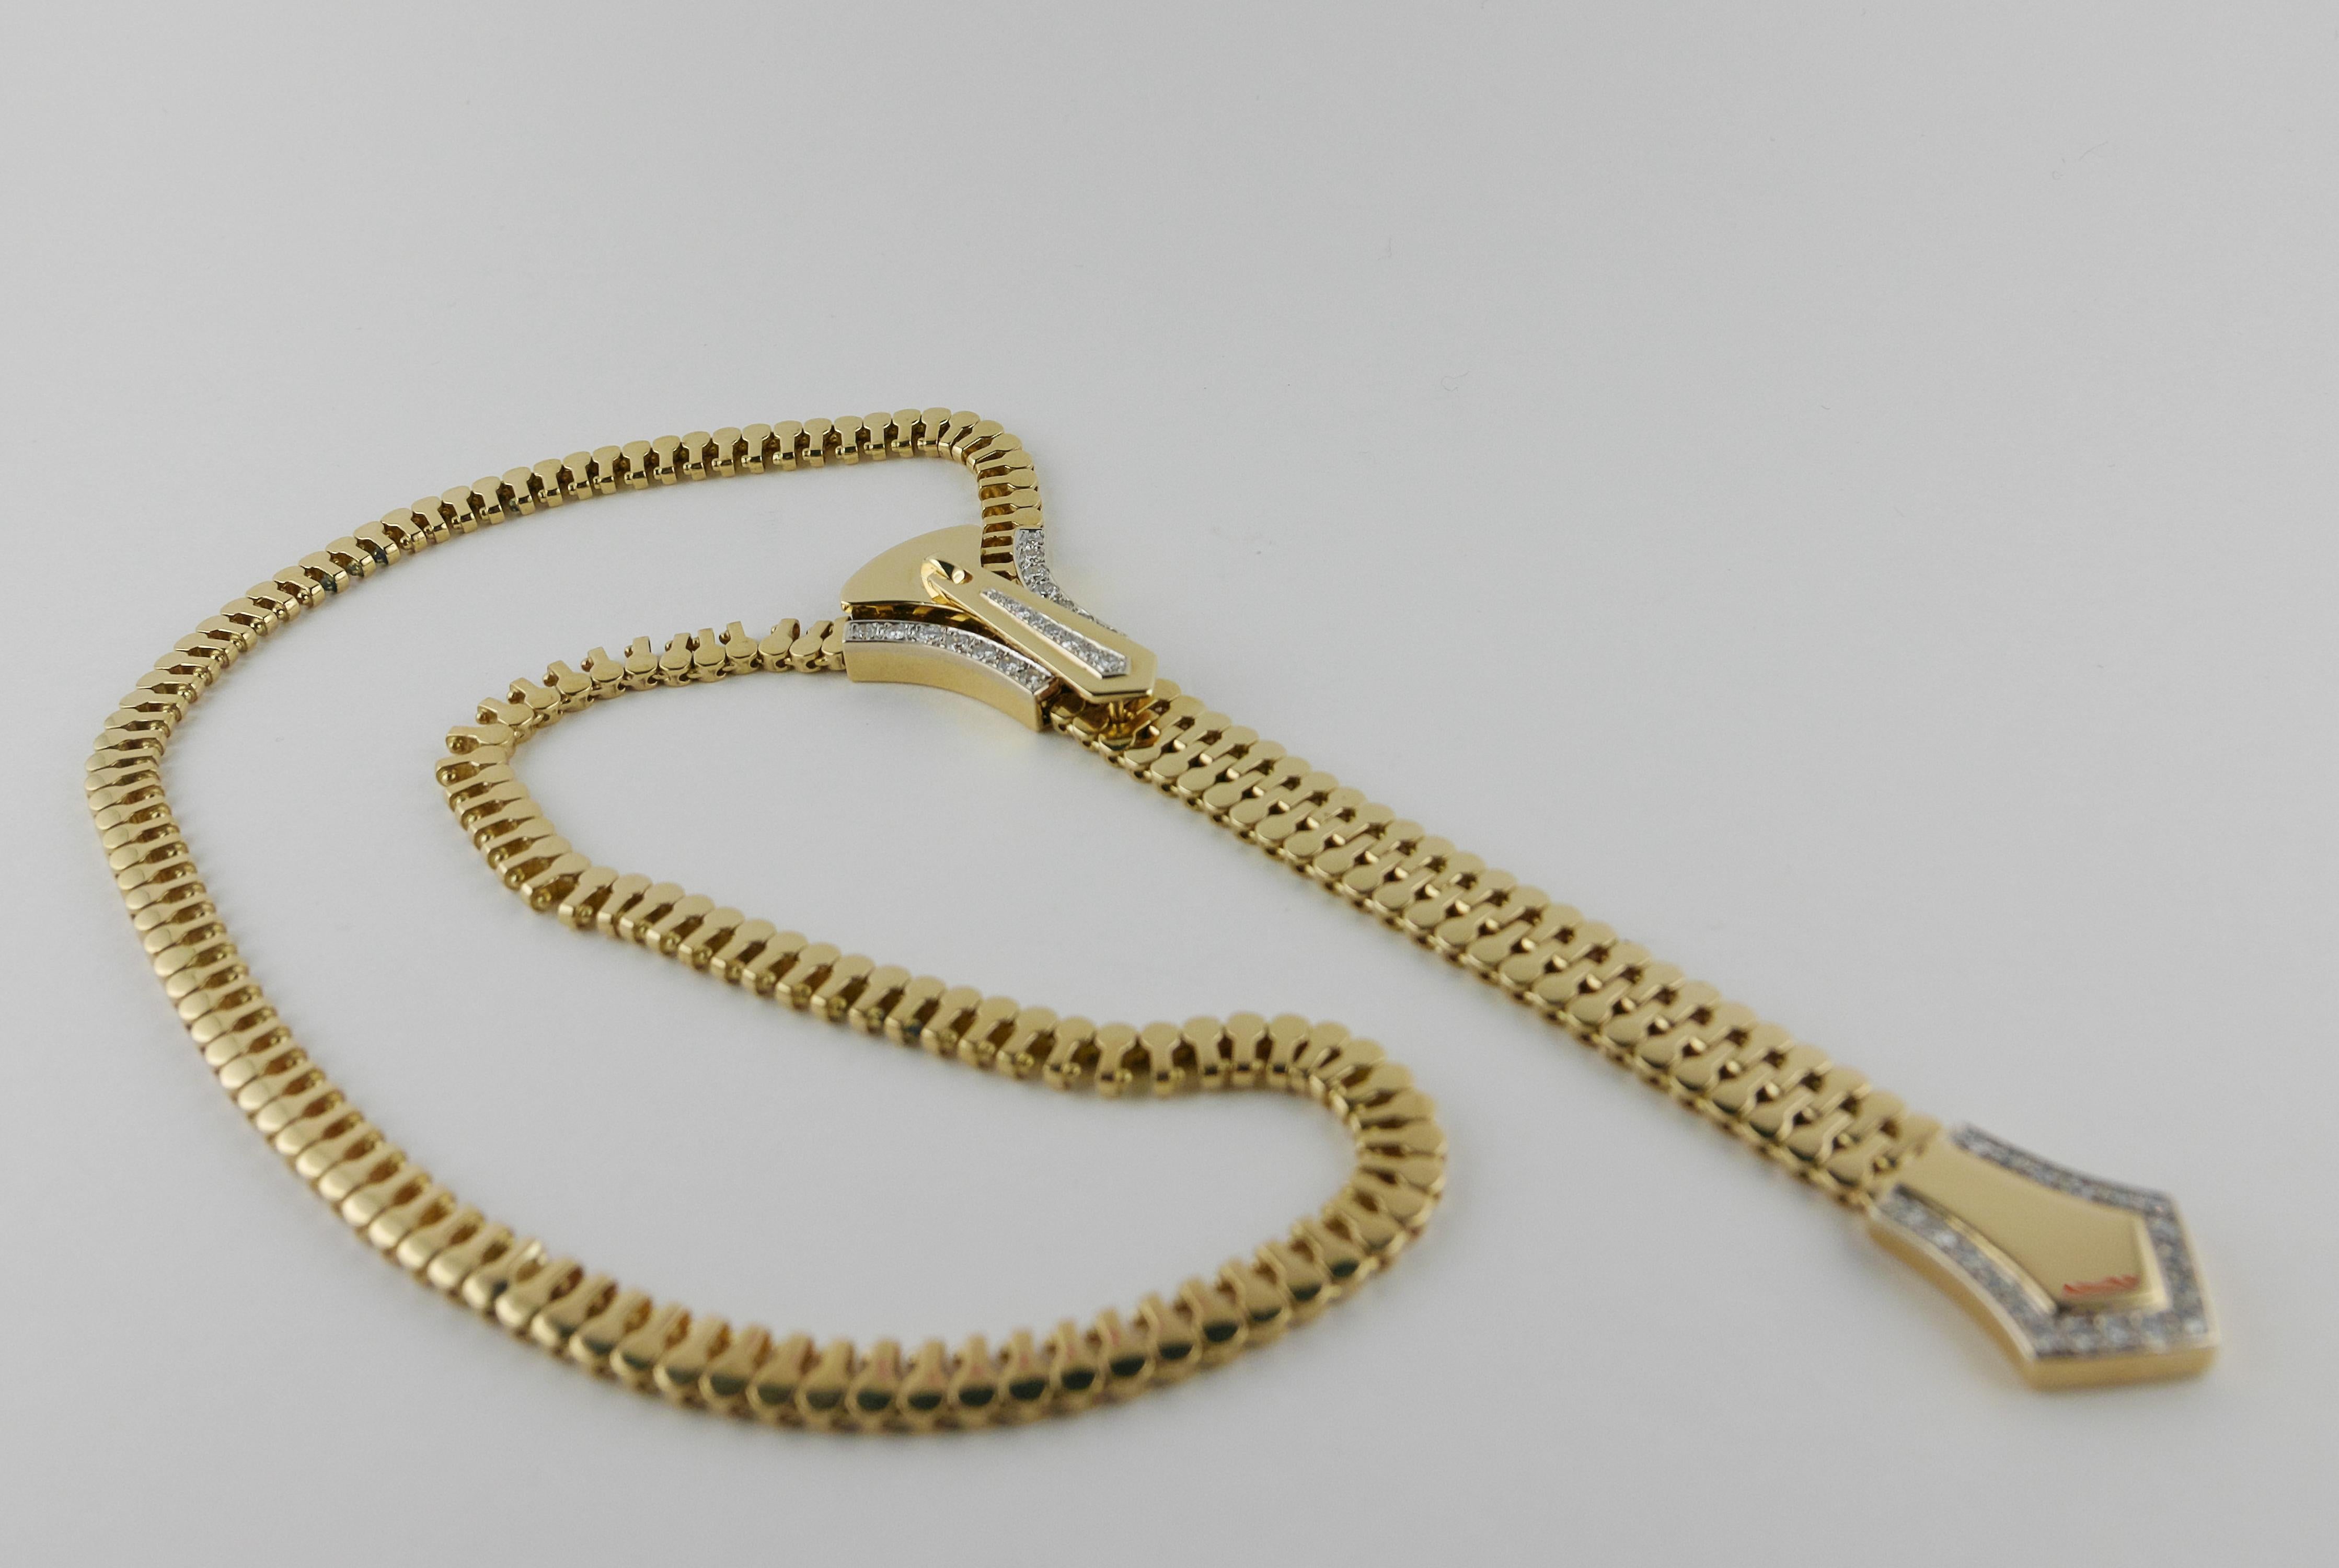 This Italian Necklace is formed of a link chain in 18K Yellow Gold and is fitted with a working diamond set zip motif that runs up and down the chain and can be fixed at any desired position making it exceptionally versatile as it can be worn in